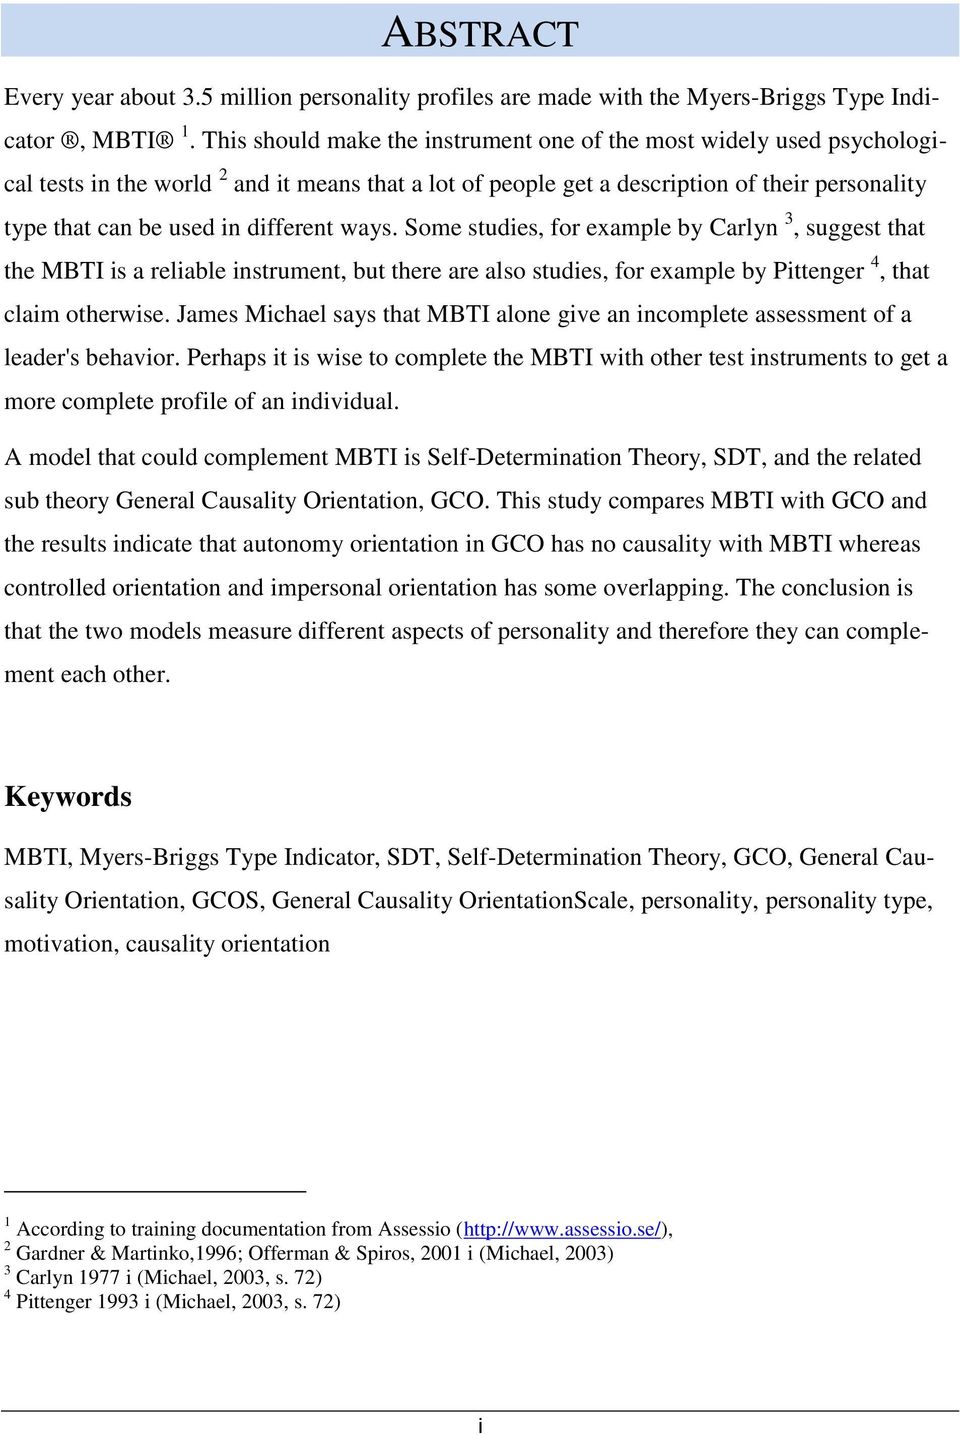 different ways. Some studies, for example by Carlyn 3, suggest that the MBTI is a reliable instrument, but there are also studies, for example by Pittenger 4, that claim otherwise.